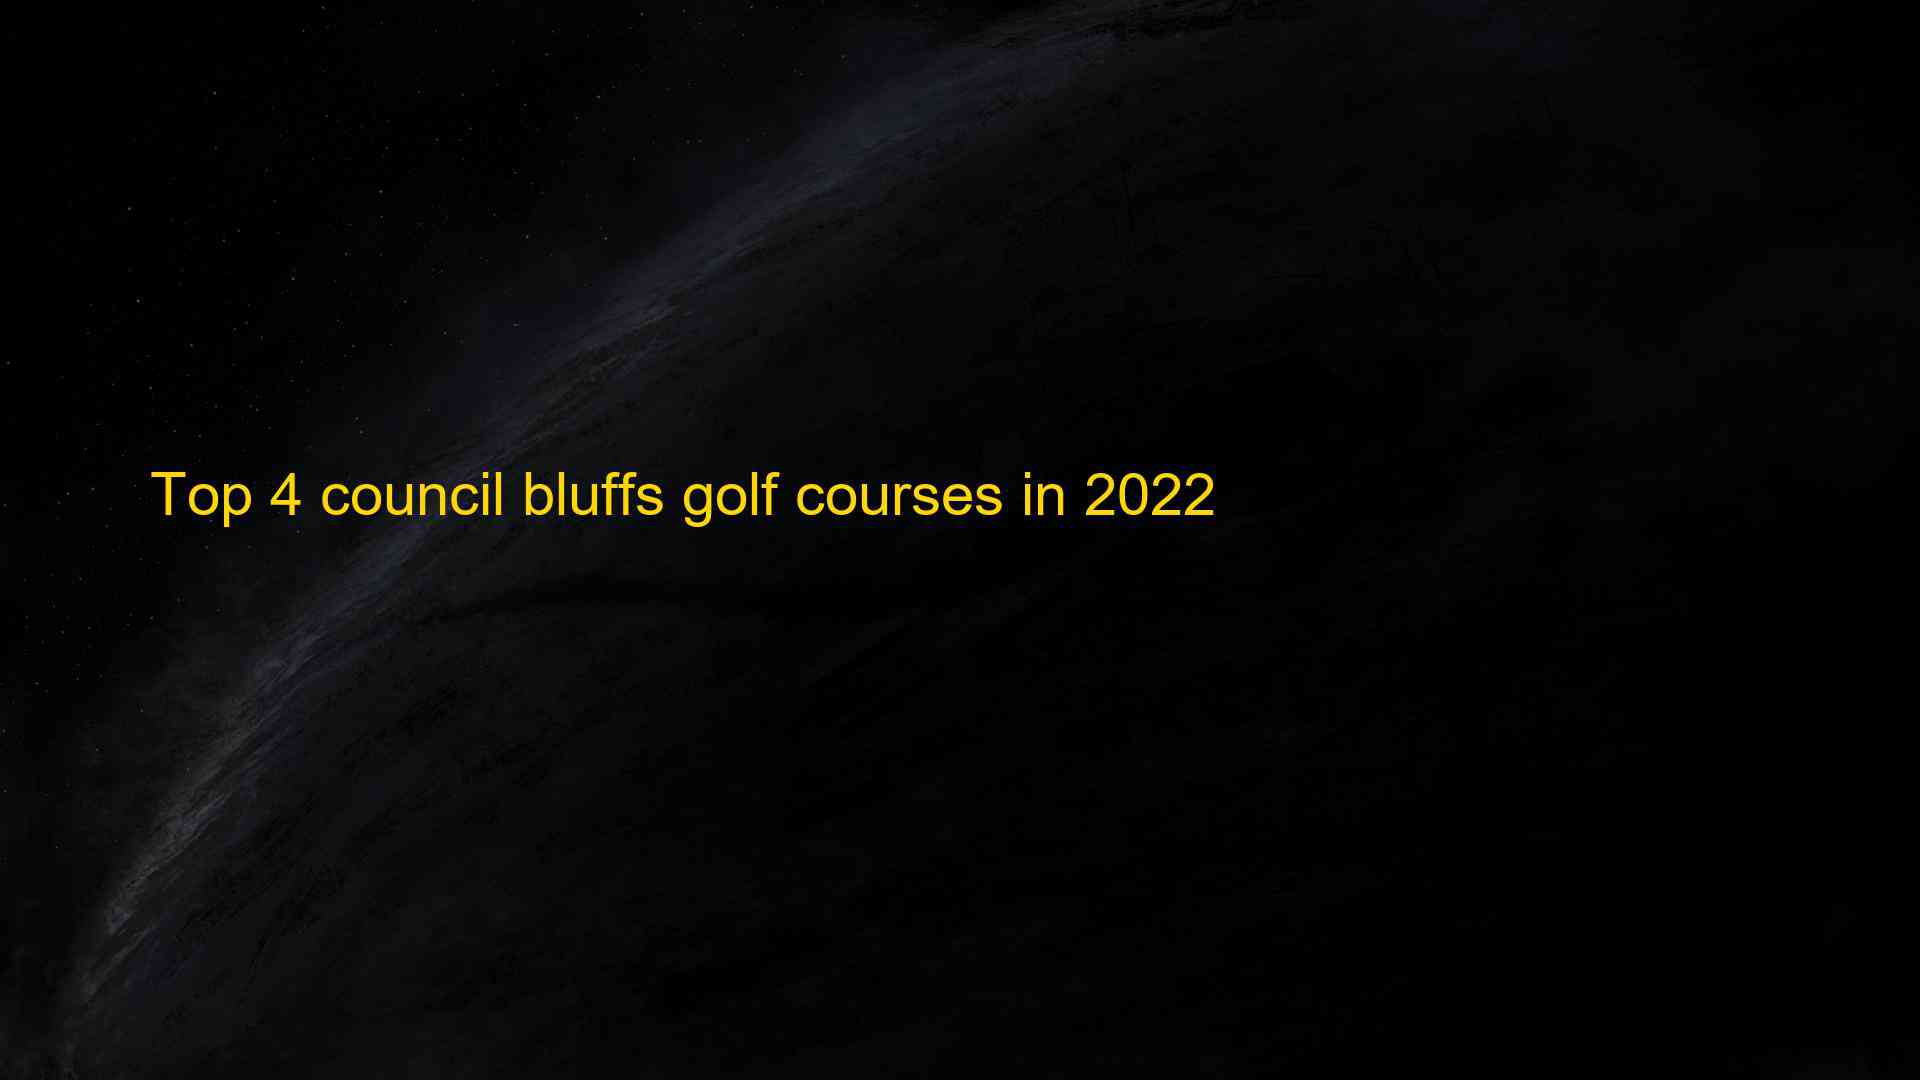 Top 4 council bluffs golf courses in 2022 1661924950